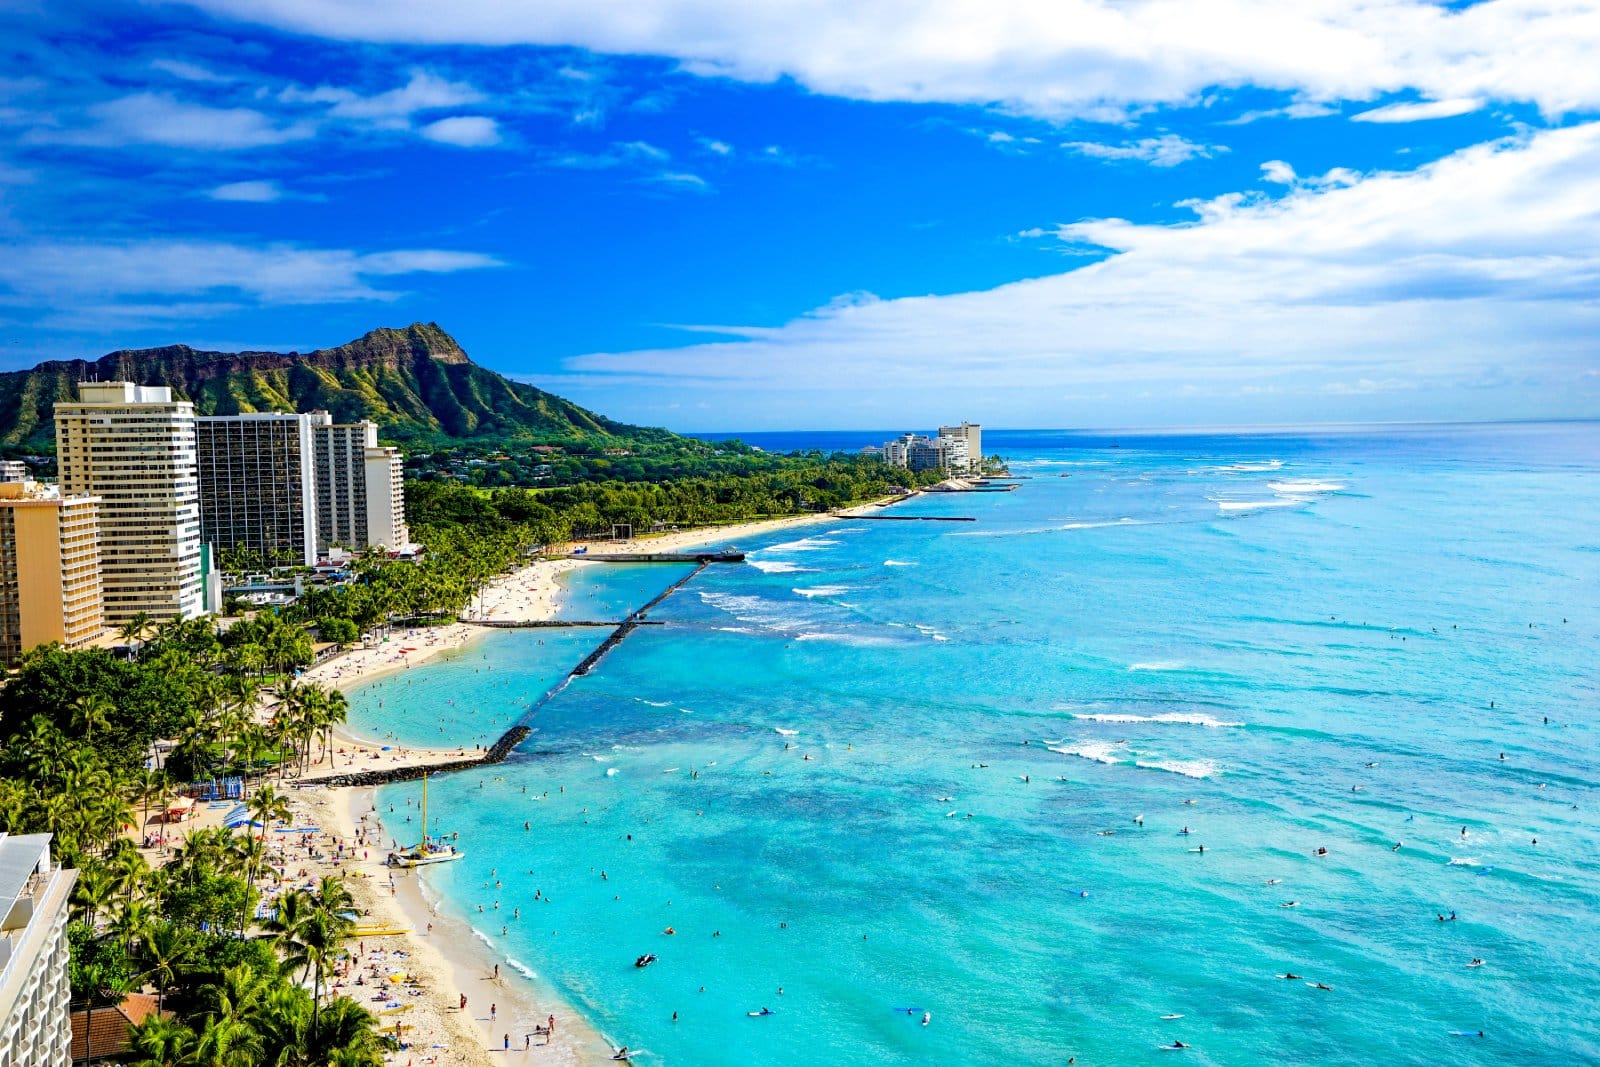 <p class="wp-caption-text">Image Credit: Shutterstock / aines</p>  <p><span>Peaceful, spiritual, and wellness-oriented. If your ideal lifestyle includes morning yoga on the beach, a deep connection with nature, and a laid-back attitude, Hawaii’s tranquil paradise aligns with your soul.</span></p>